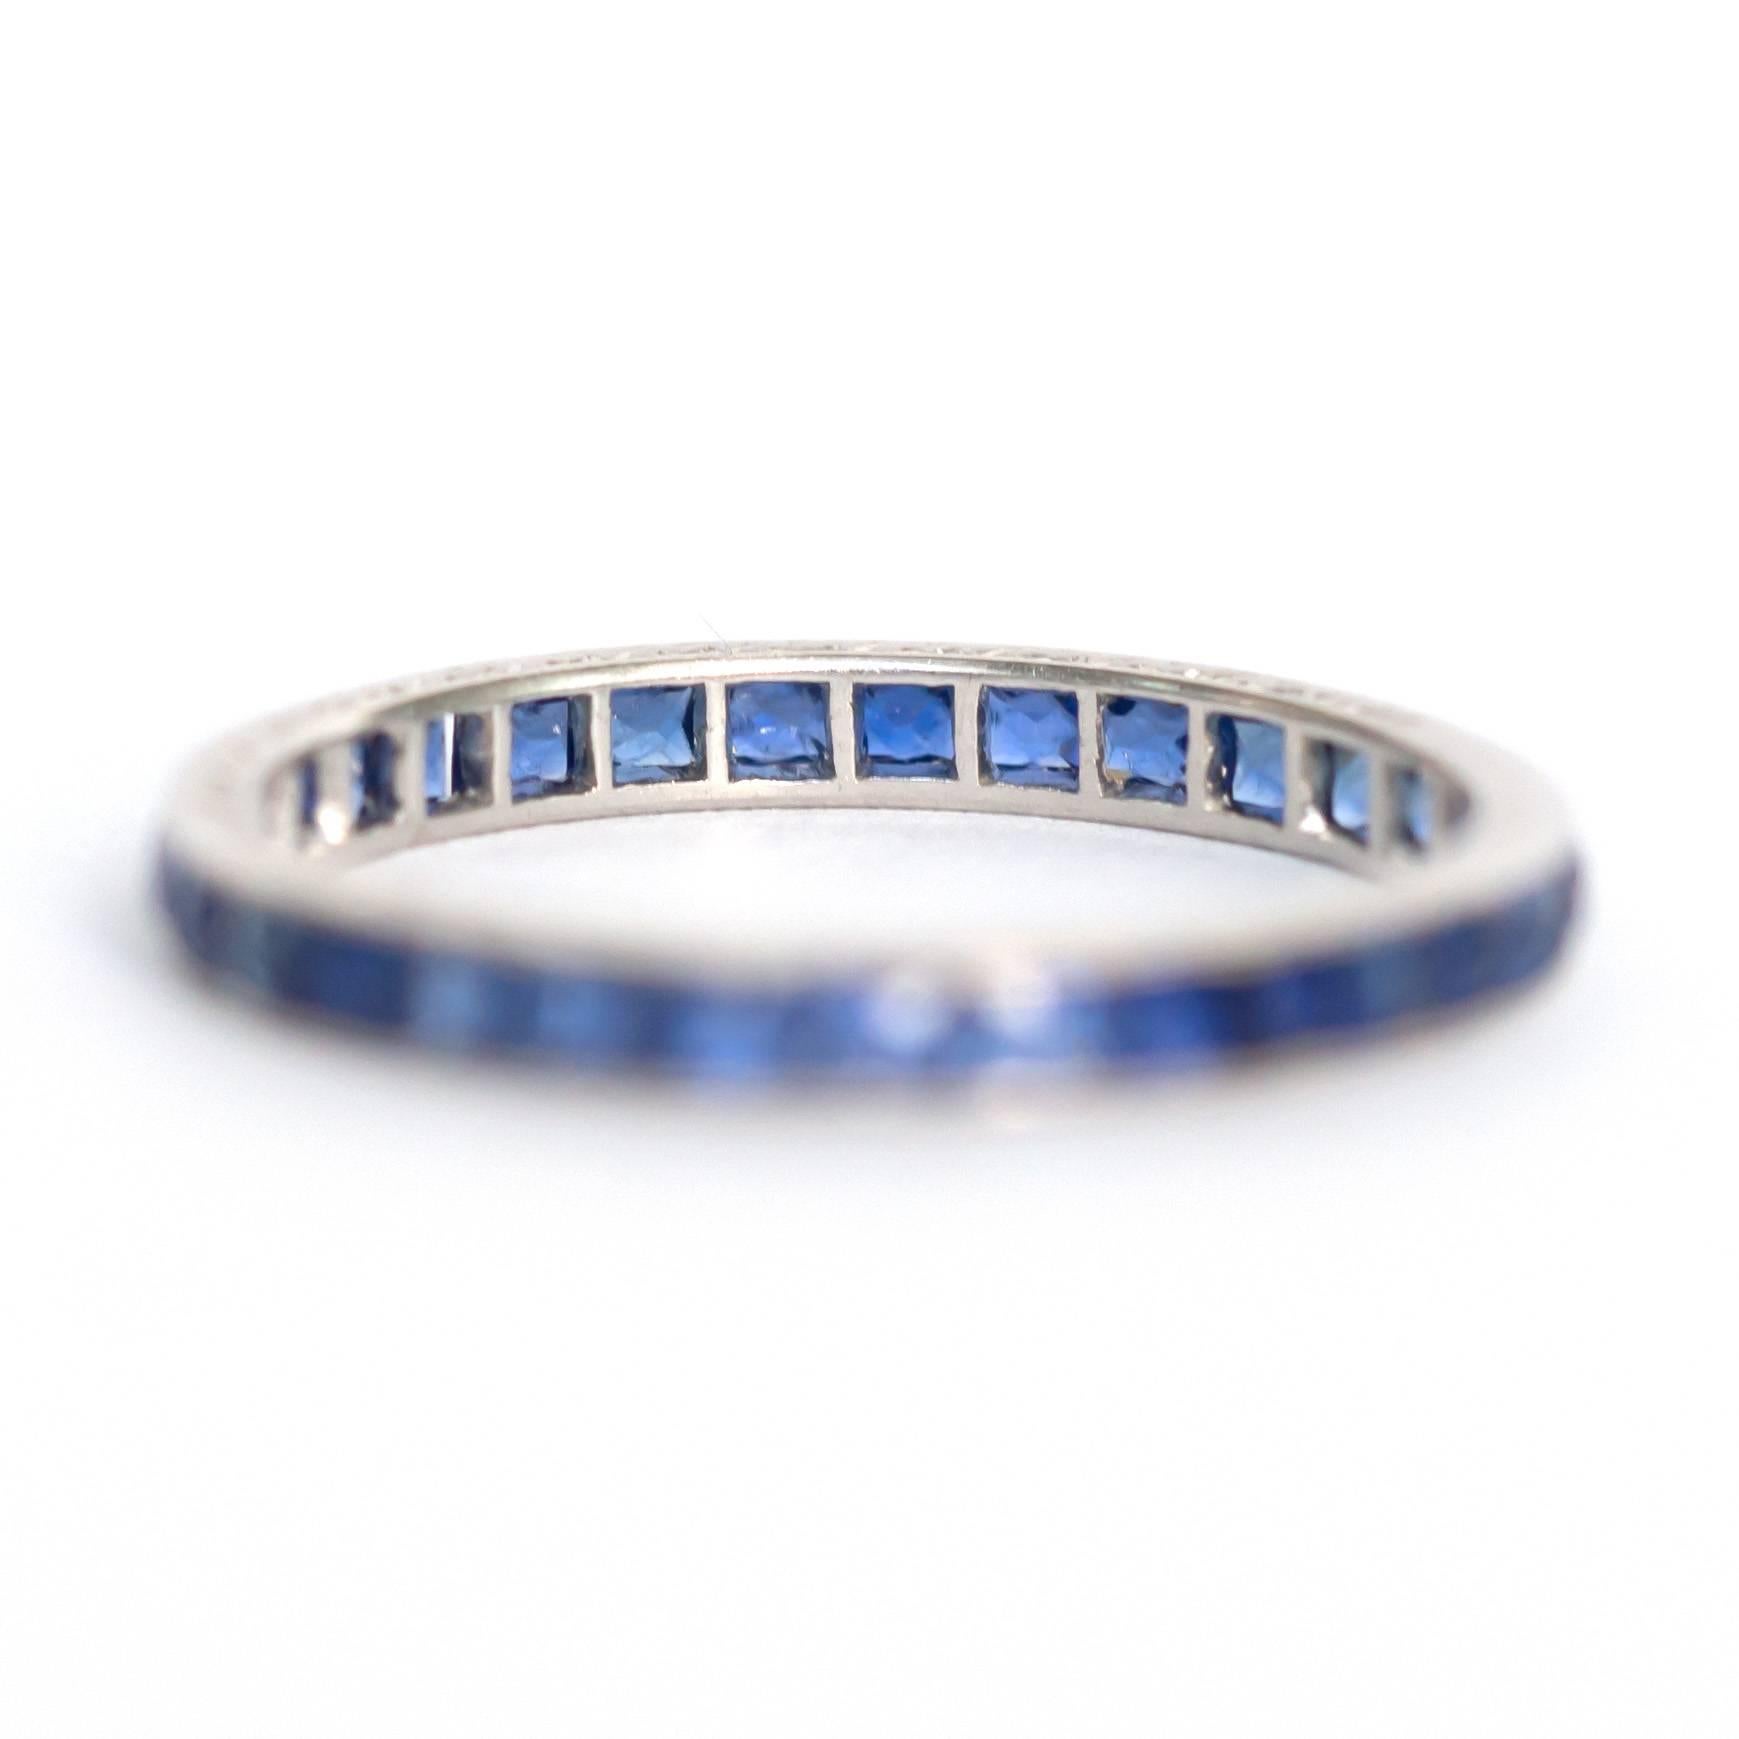 Item Details: 
Ring Size: 8.5 
Metal Type: Platinum
Weight: 2.6 grams

Color Stone Details: 
Type: Natural Sapphire
Shape: French Cut
Carat Weight: 2.00 carat, total weight.
Color: Blue

Finger to Top of Stone Measurement: 1.93mm